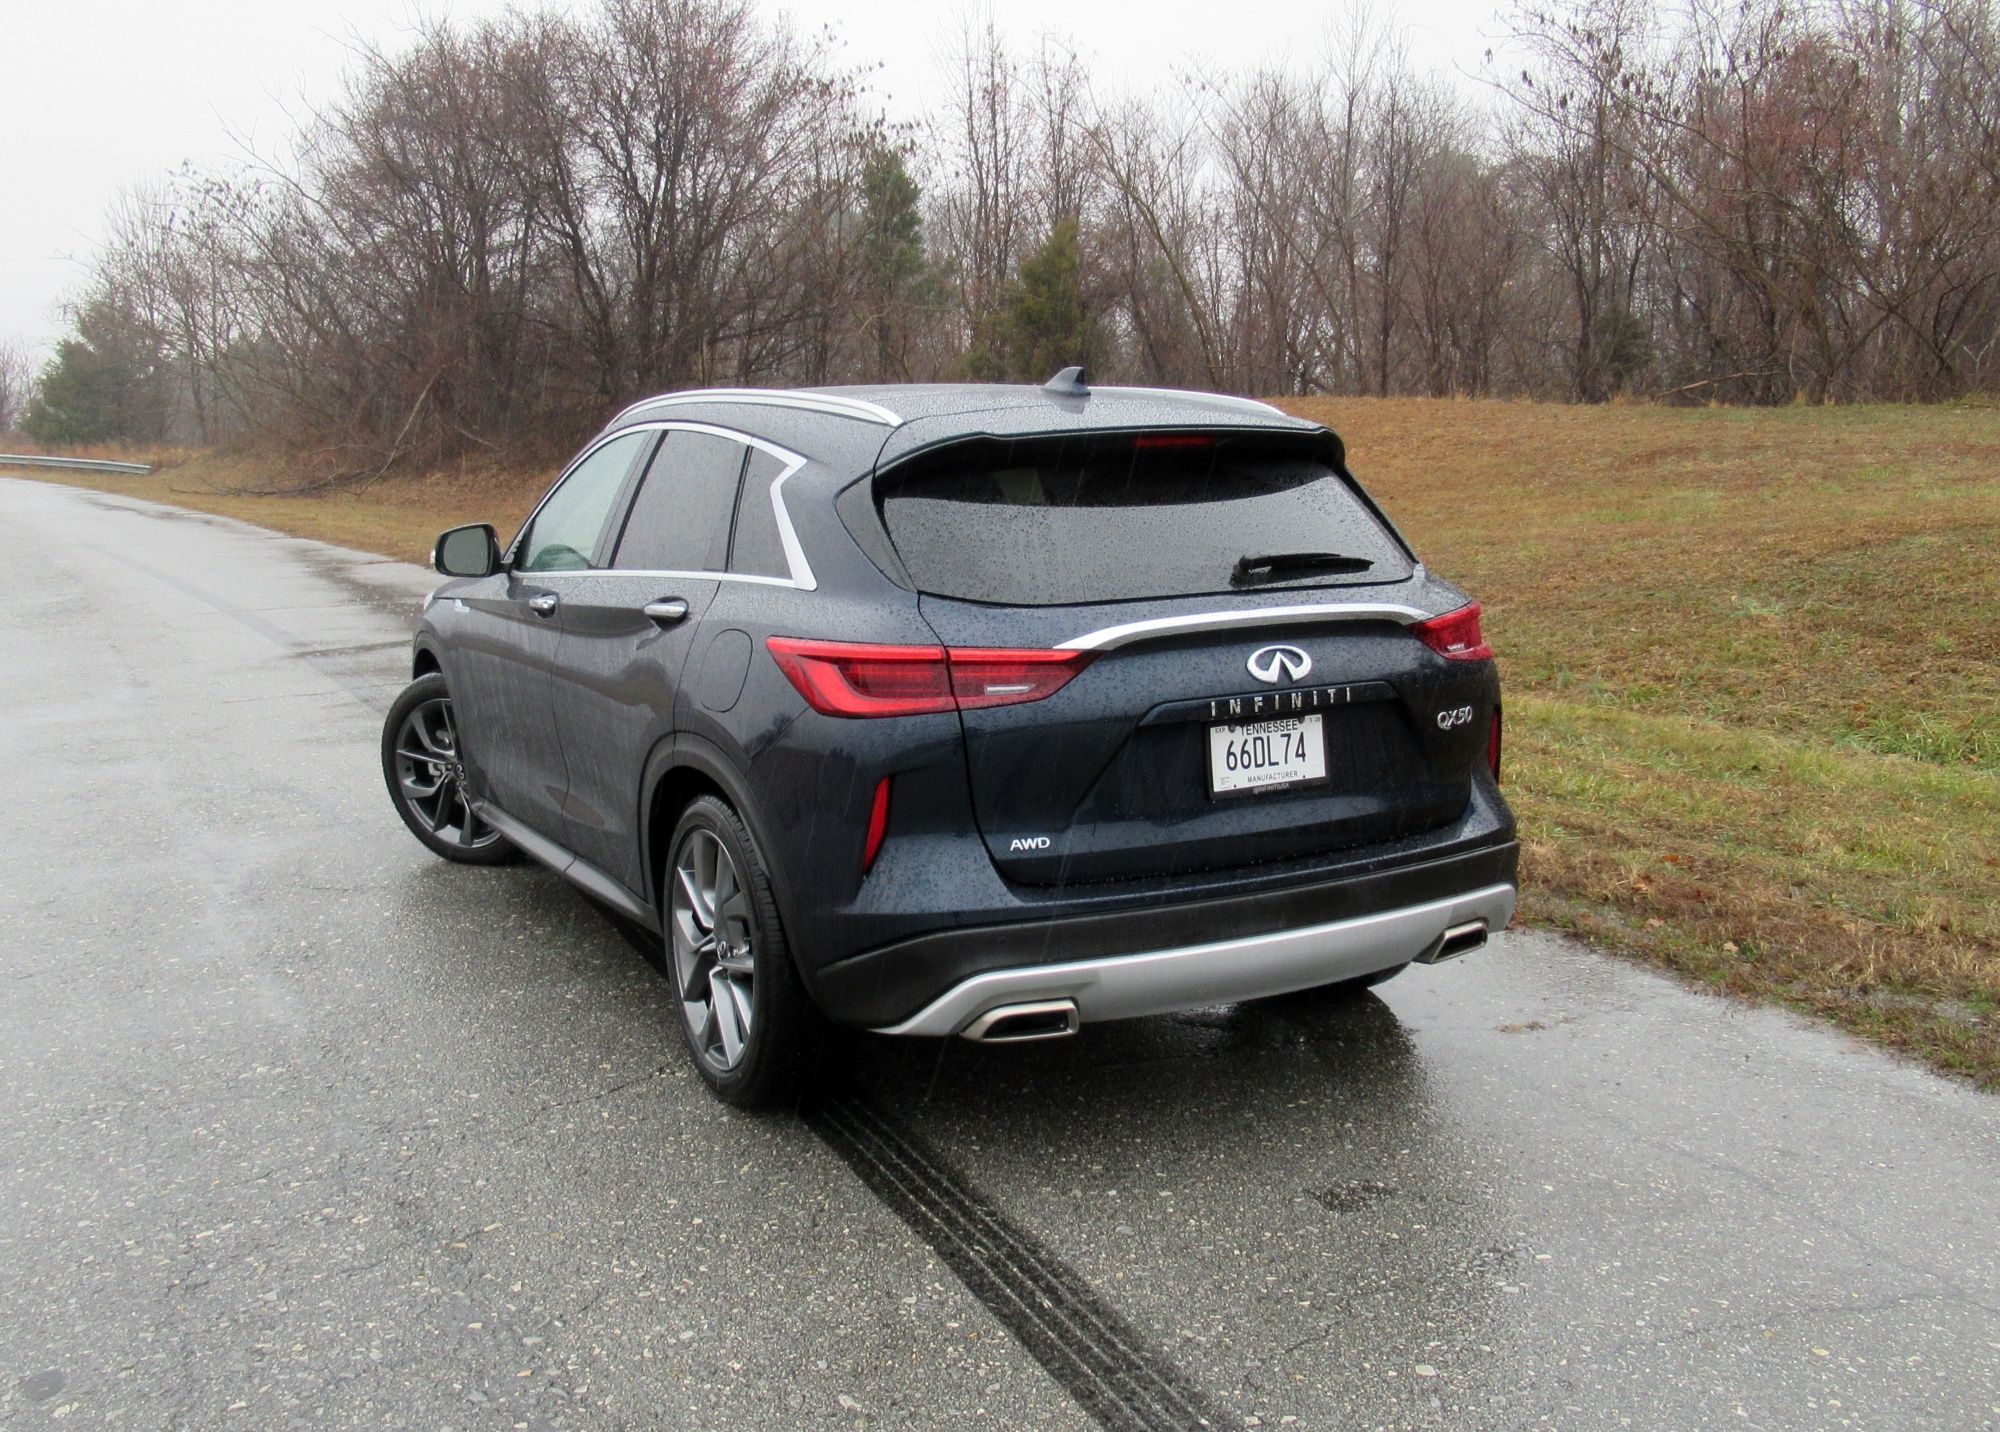 2020 Infiniti QX50 Impressions - What's Changed from 2019?